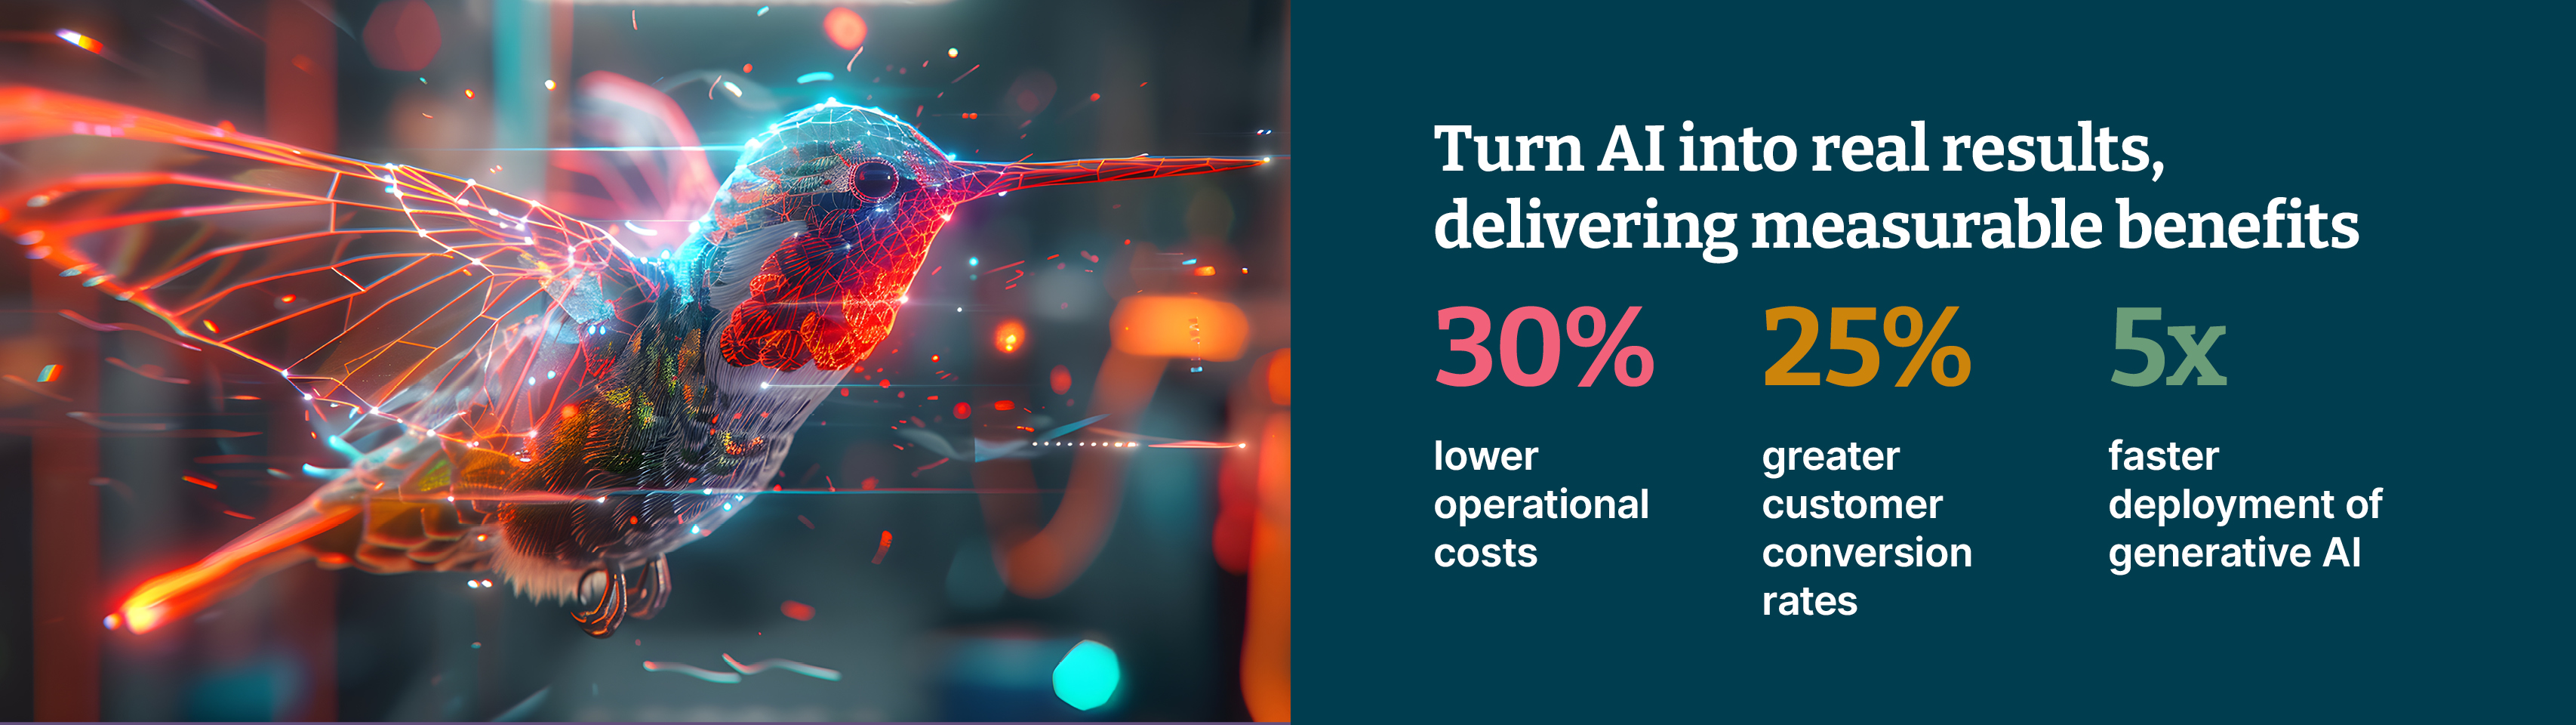 Ai generated humming bird flying. Turn AI into real results delivering measurable benefits,- 30% lower operational costs, 25% greater customer conversion rates and 5x faster deployment of generative AI